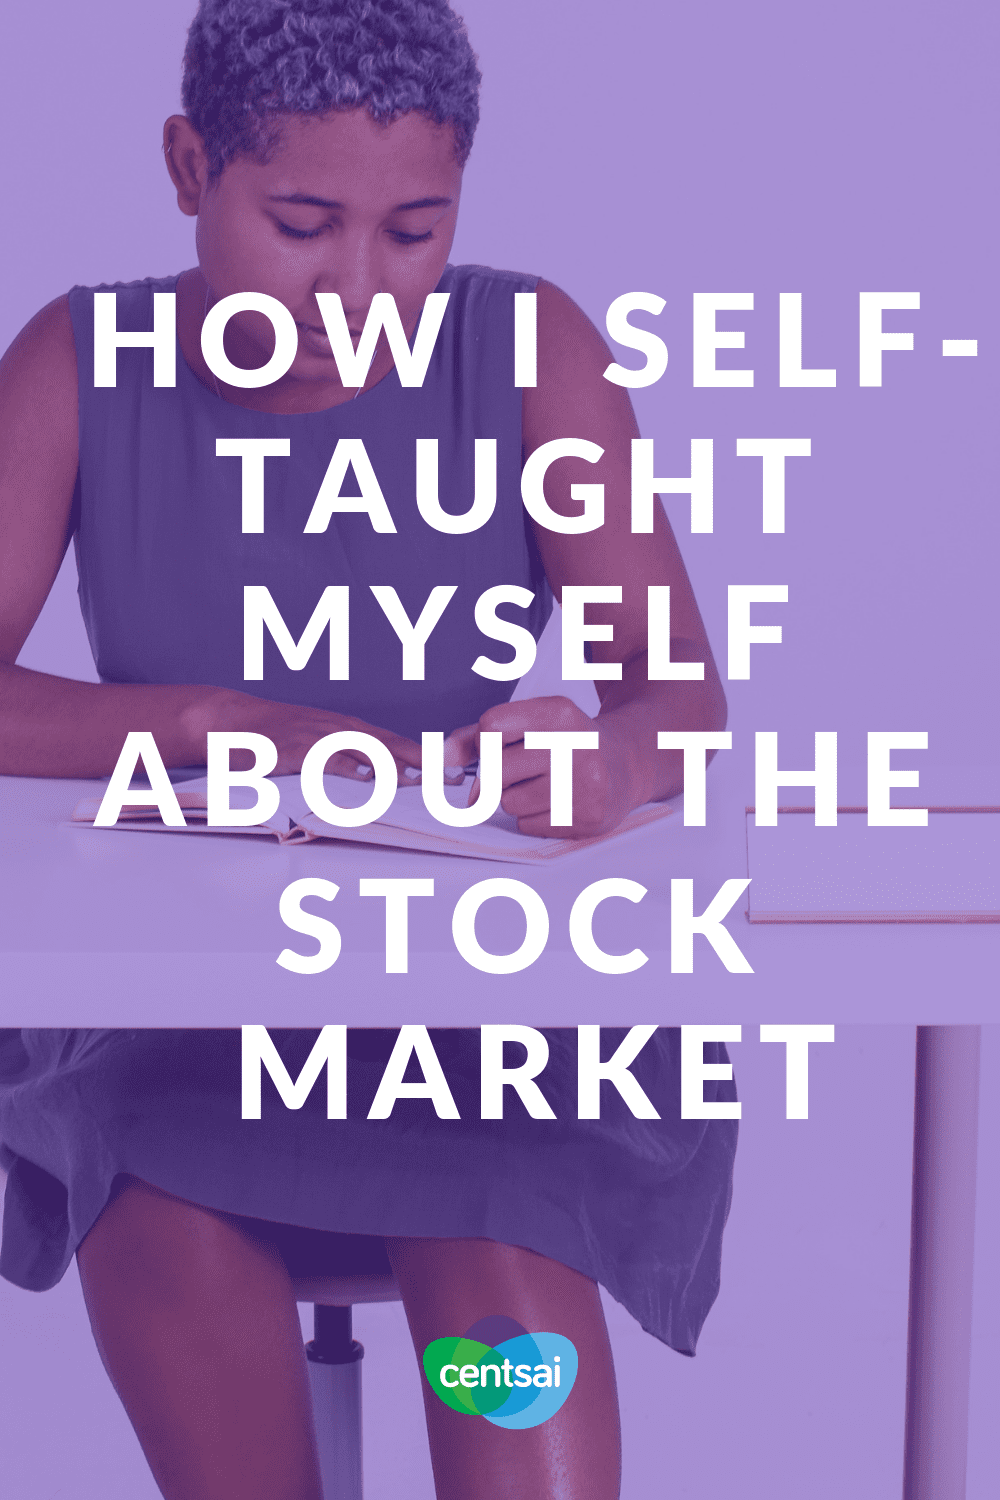 How I Self-Taught Myself About the Stock Market. Does trying to invest make your head hurt? Resources like the Motley Fool can help you with understanding the stock market. Learn how.#investment #stockmarket